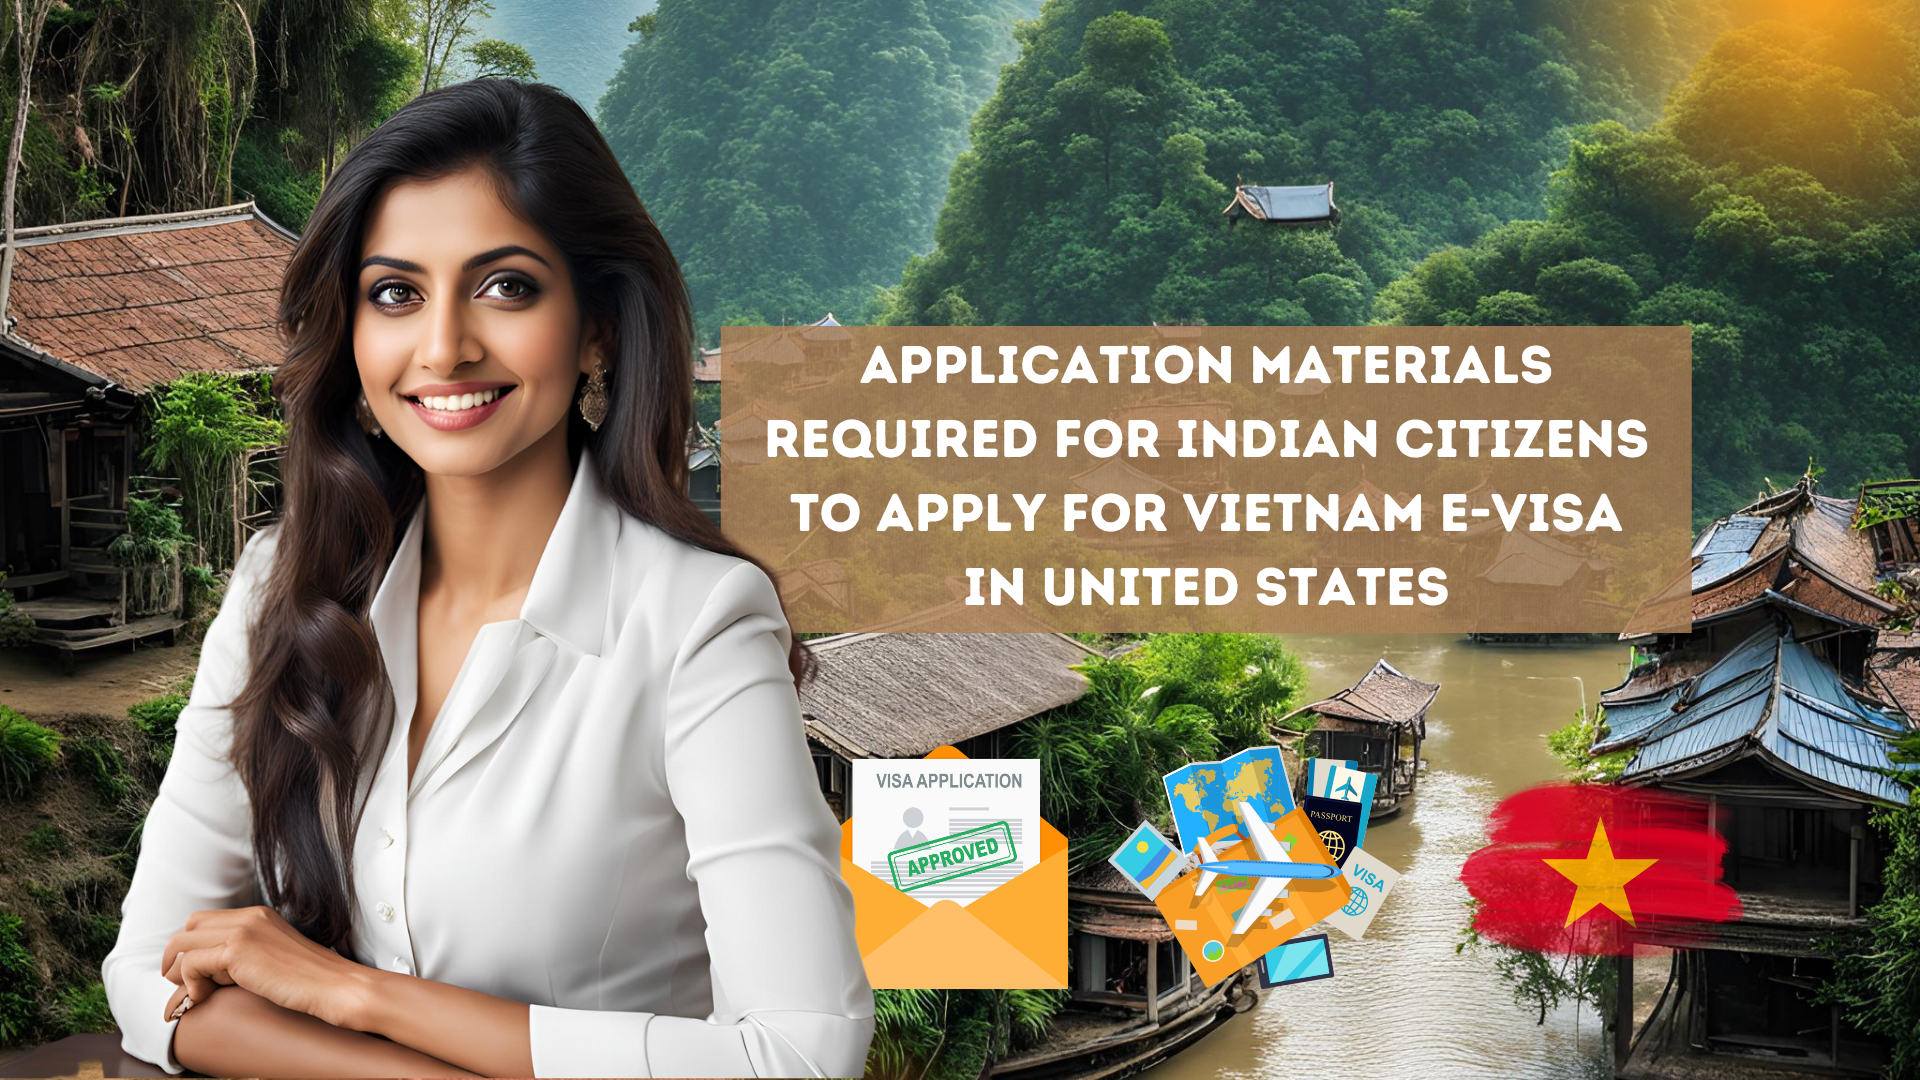 Application materials required for Indian citizens to apply for Vietnam e-visa in United States